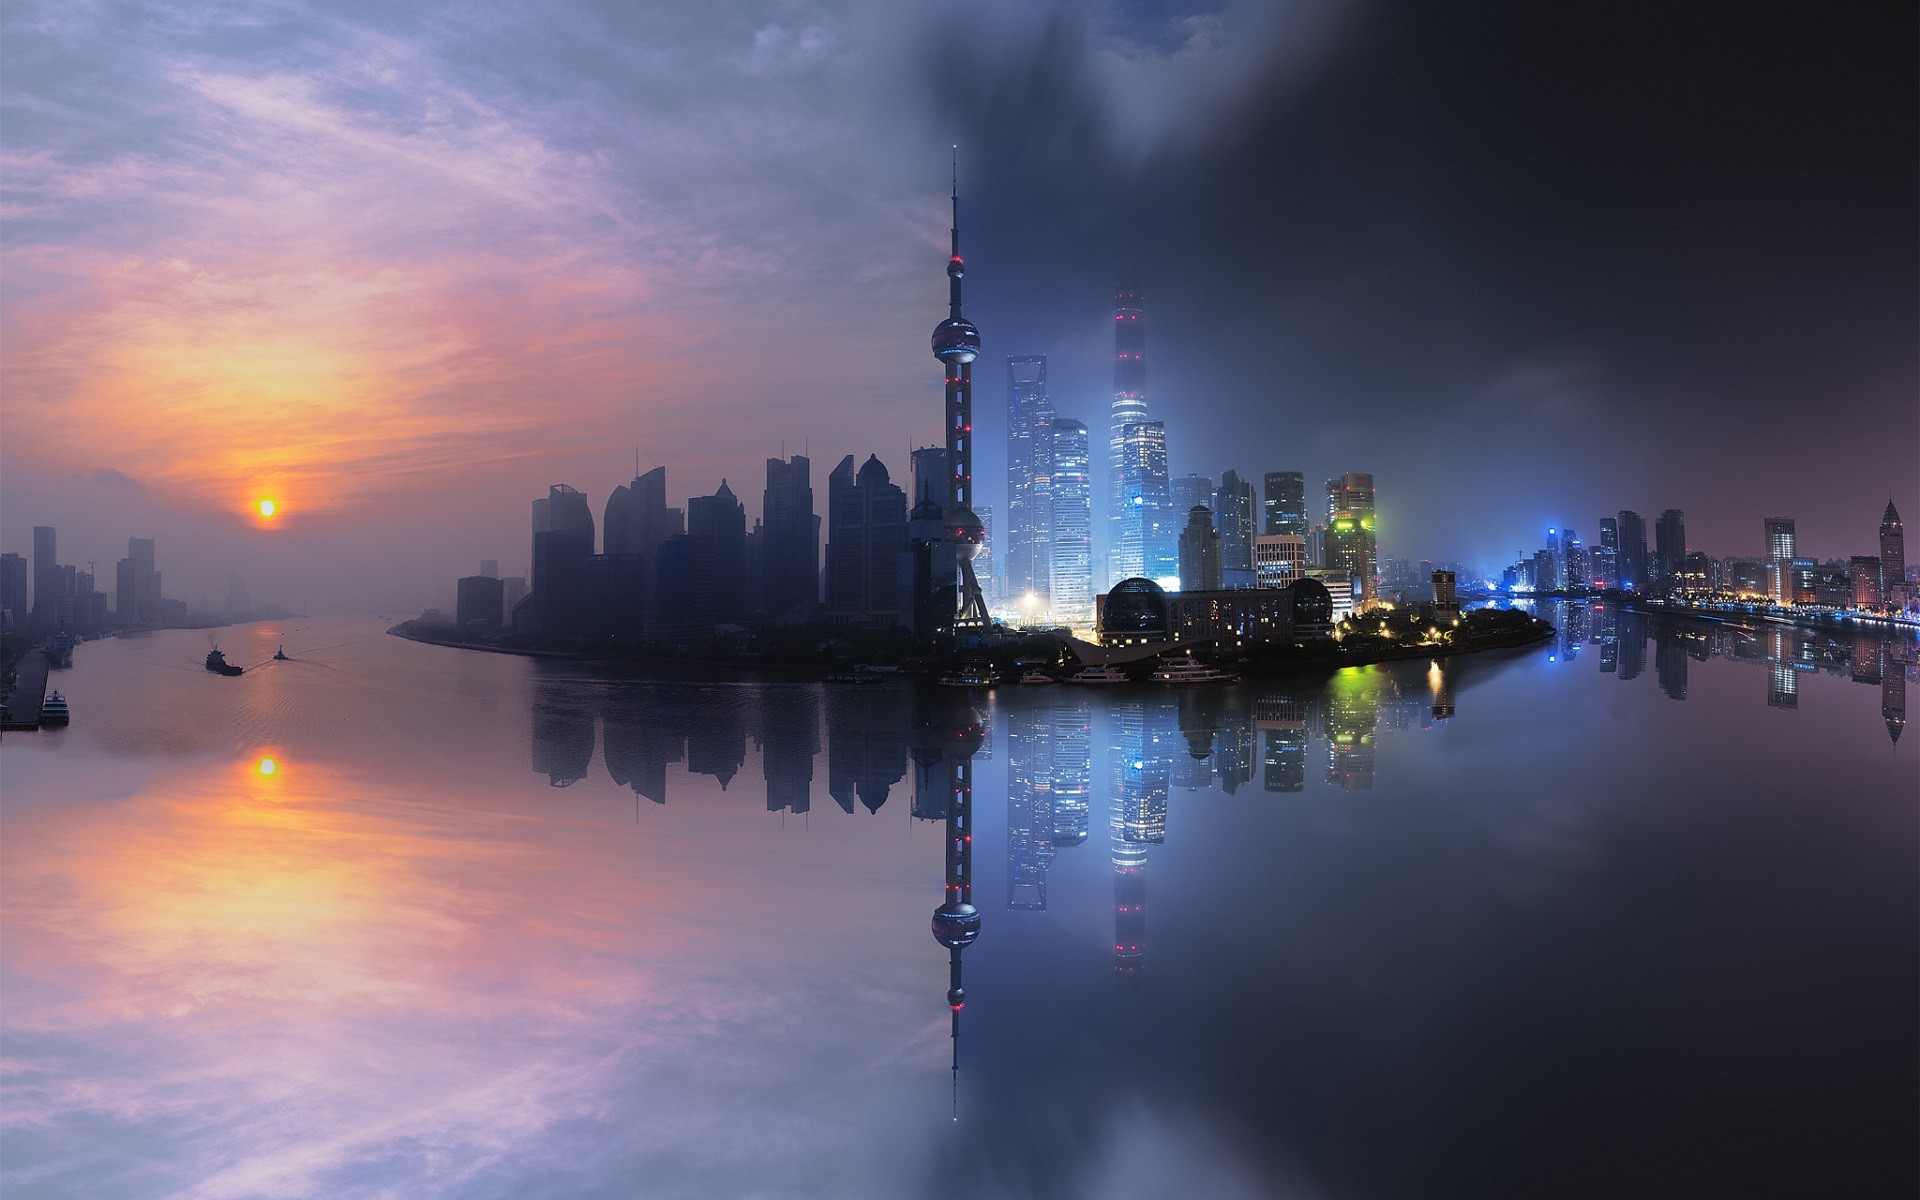 city, Cityscape, Shanghai, China, Skyscraper, Building, Sunset, Tower, Clouds, Sea, Reflection, Lights, Photo manipulation, Filter Wallpaper